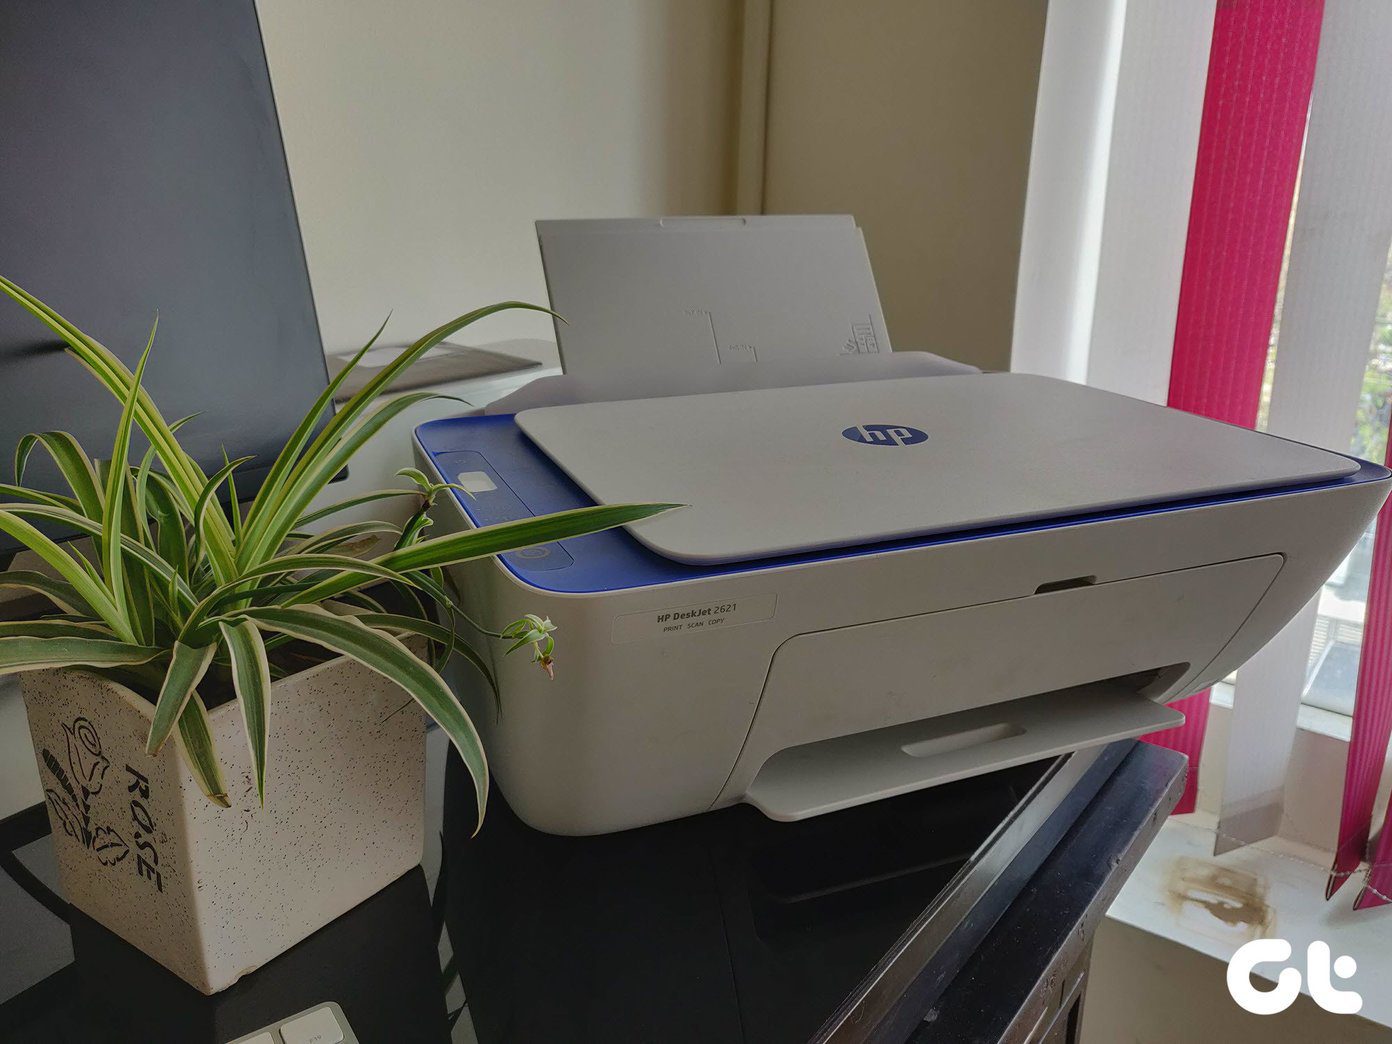 How to HP DeskJet 2600 Wi-Fi Not Working